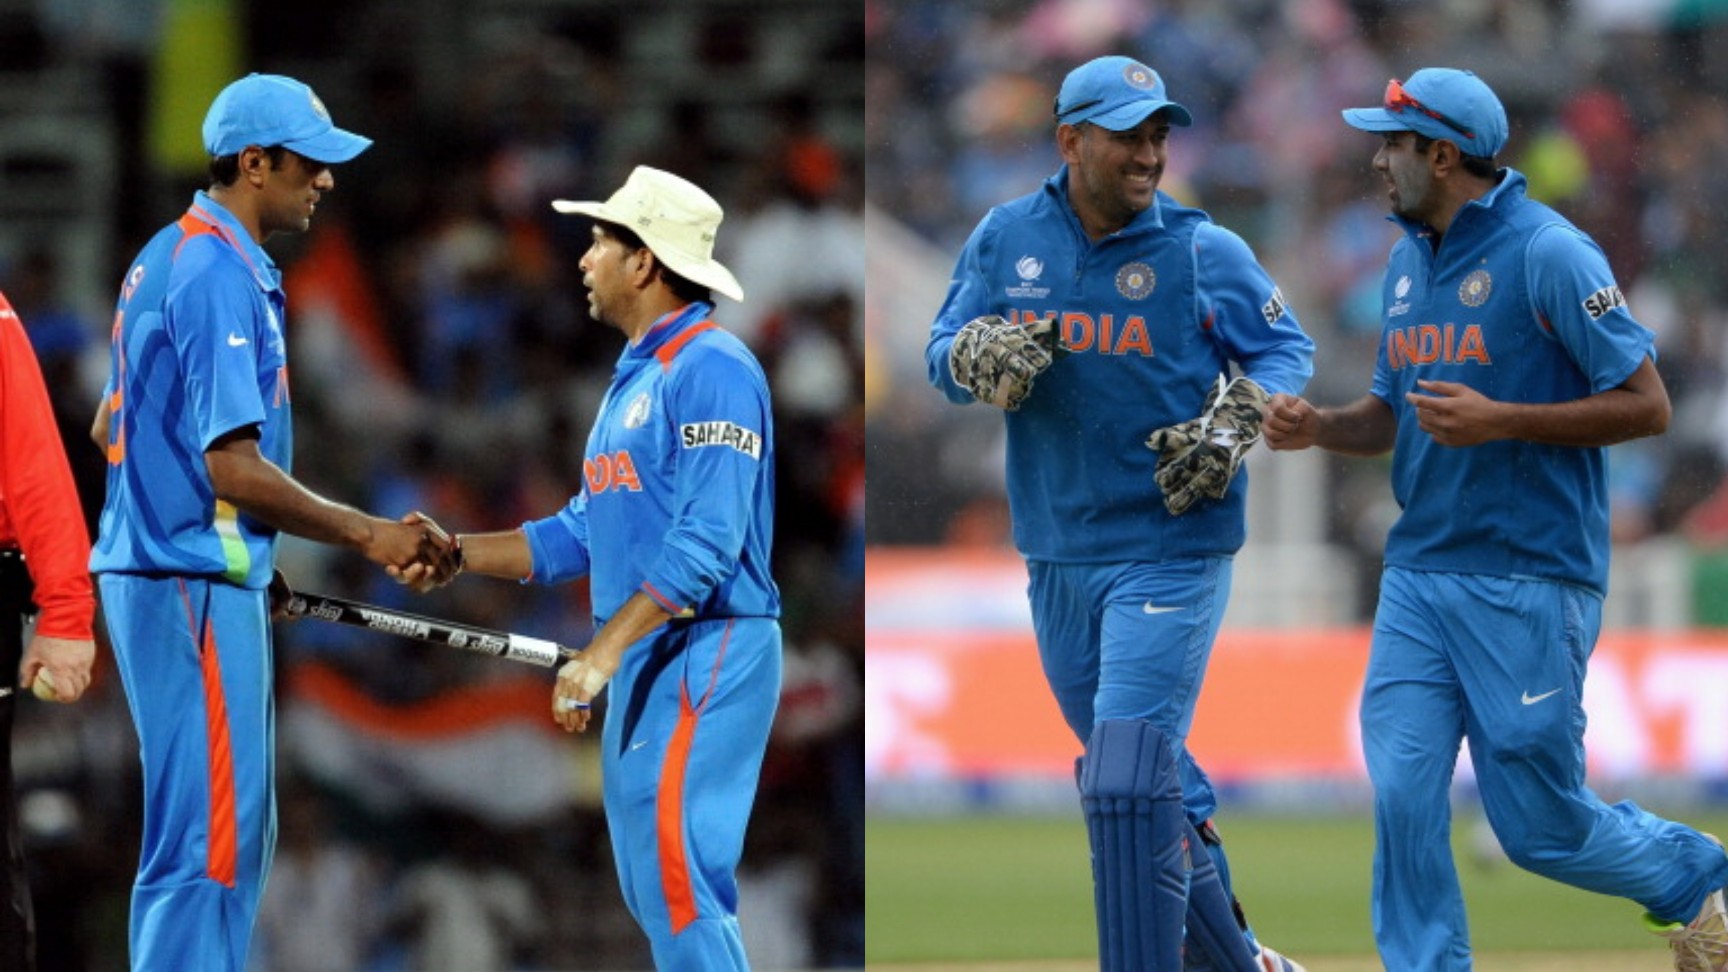 R Ashwin reveals the instances when MS Dhoni and Sachin Tendulkar helped him during his career